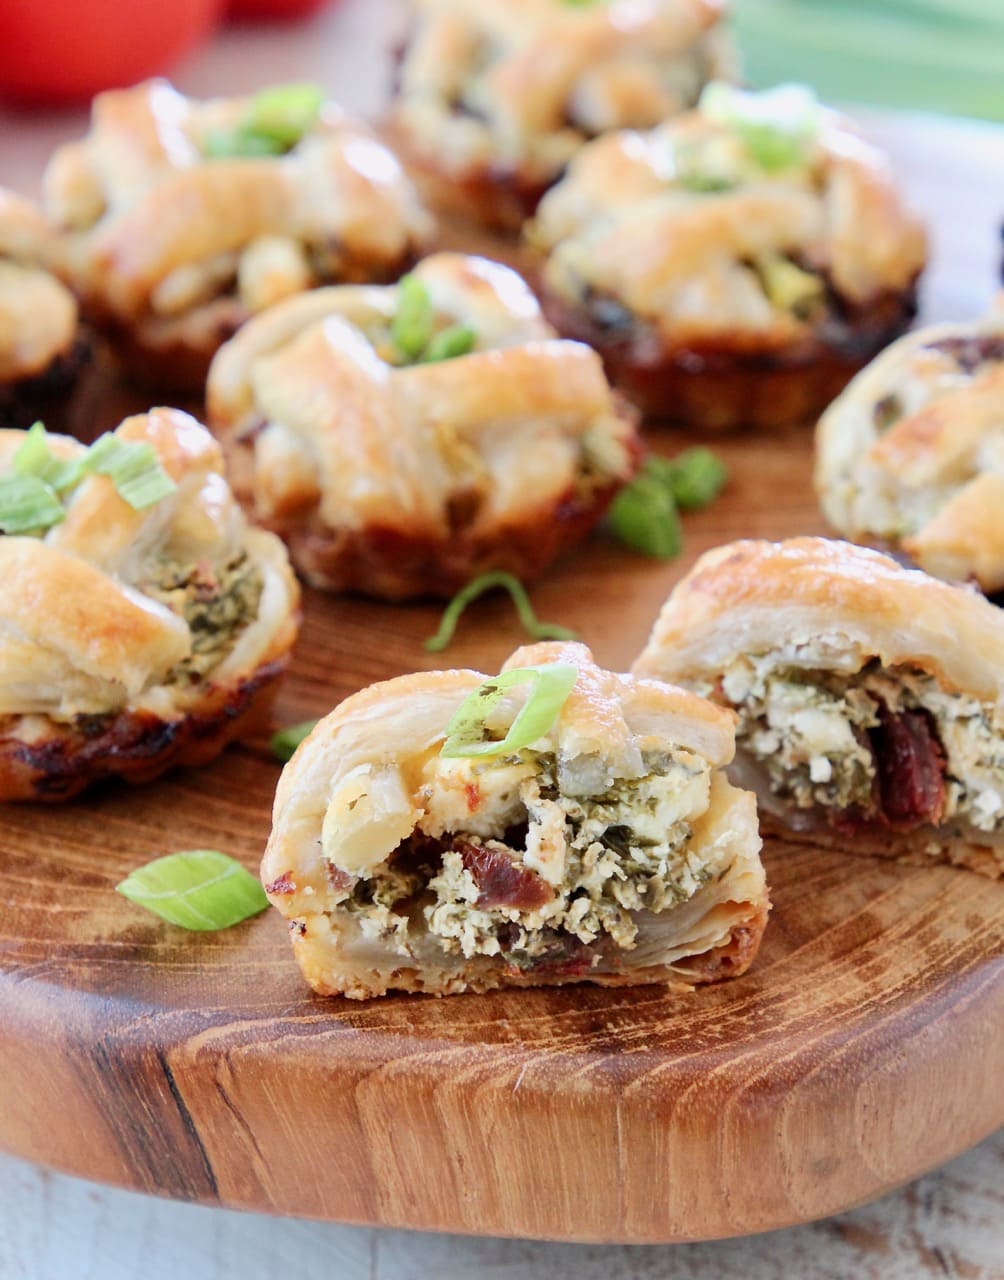 Mini Pies filled with Spinach, Feta Cheese and Sun Dried Tomatoes